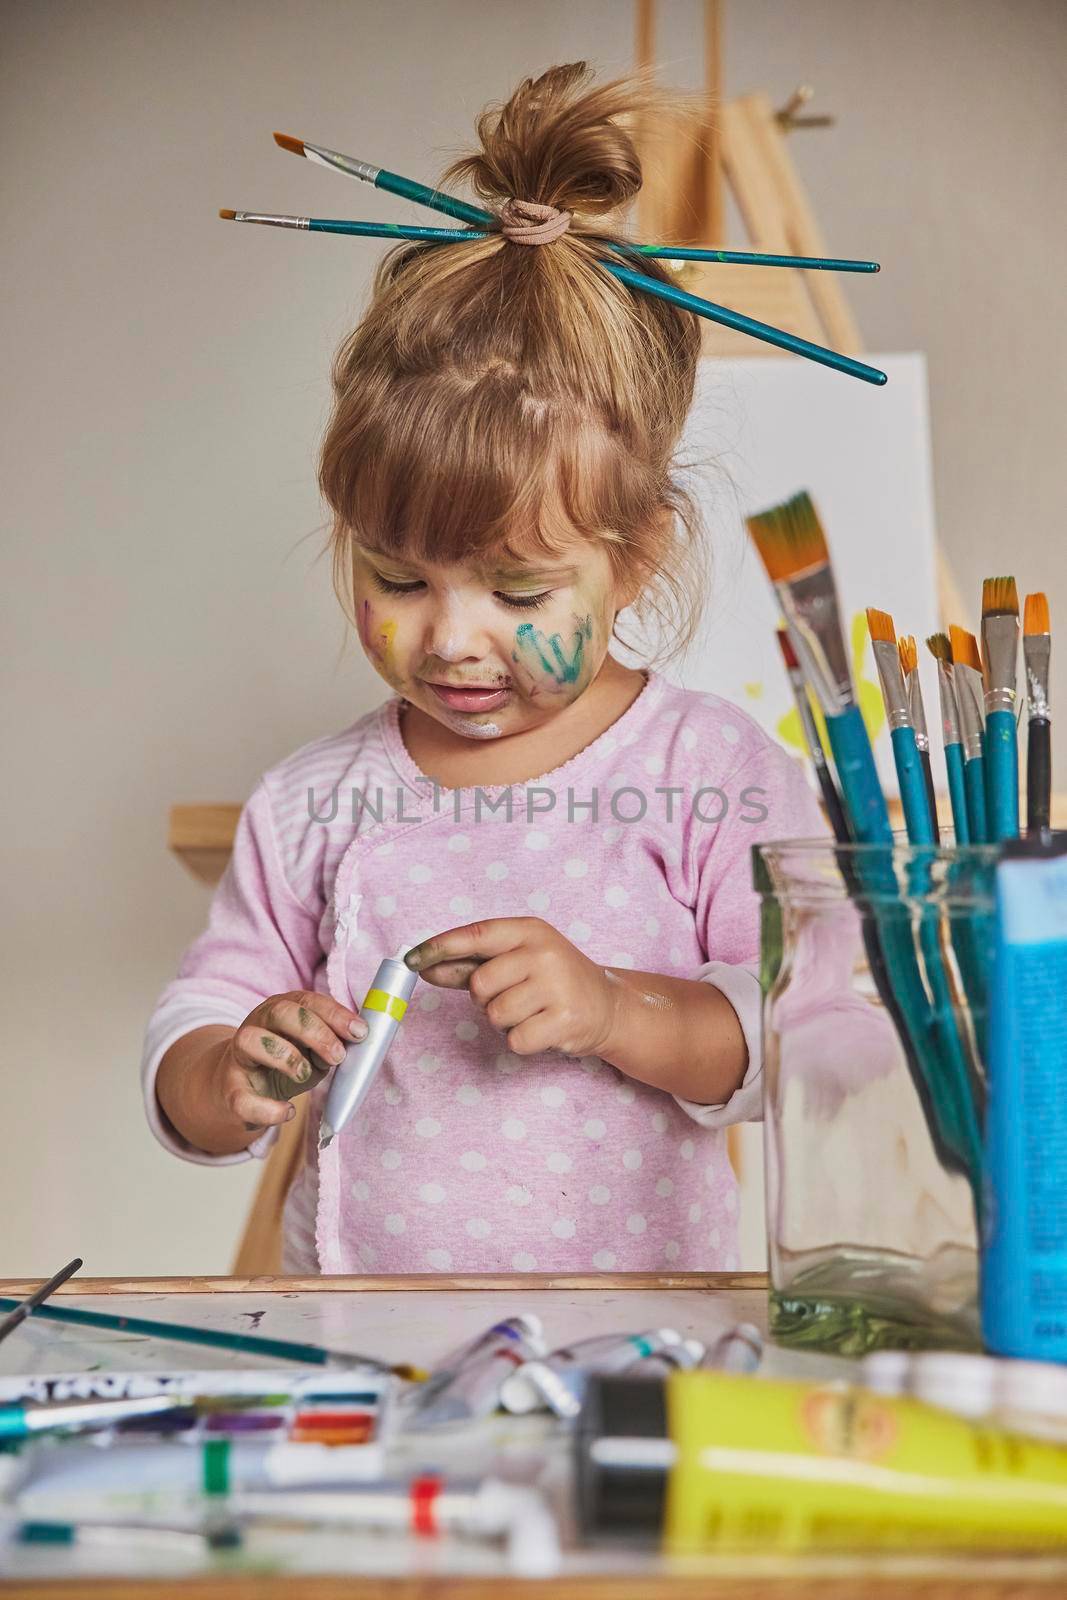 Charming child draws and stains everything with paints.